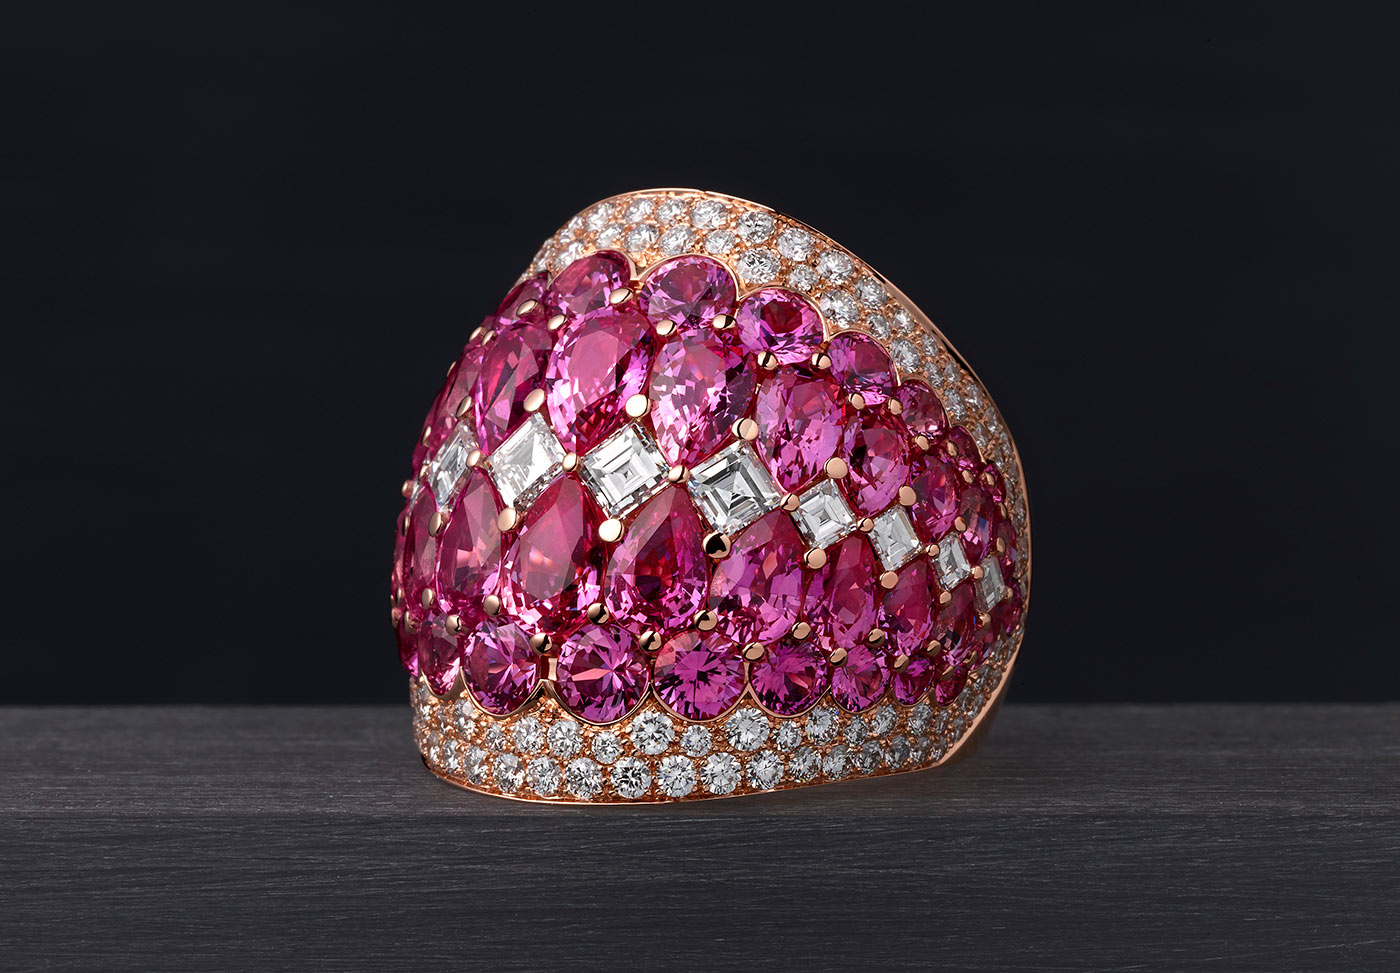 Baenteli Sphere ring with pink sapphires and diamonds